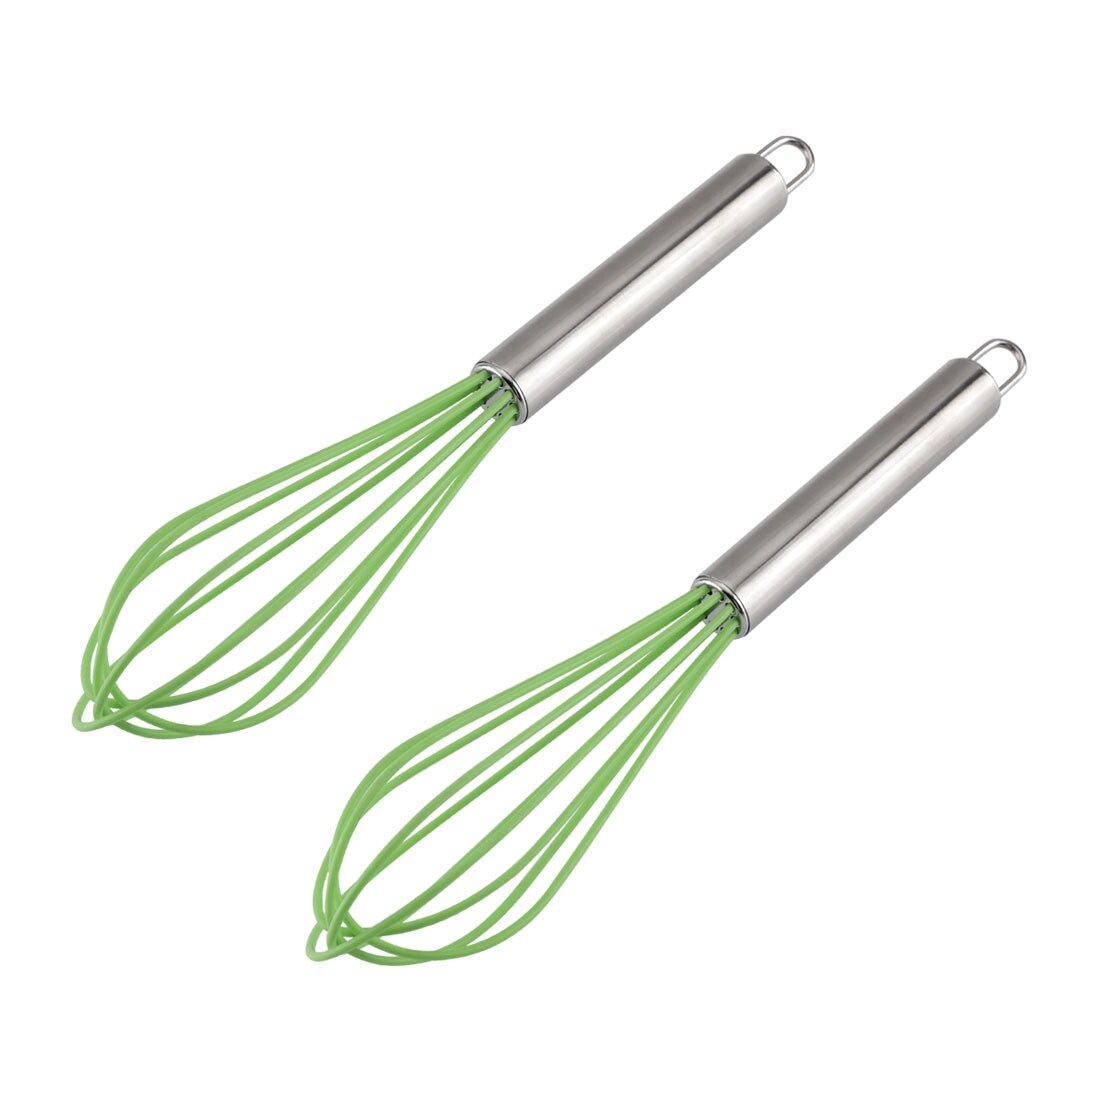 https://ak1.ostkcdn.com/images/products/is/images/direct/41b56a7bbe09125320c50ffd550c462ae91f97dc/Egg-Whisk-Silicone-Whisk-Mixer-Kitchen-Utensil.jpg